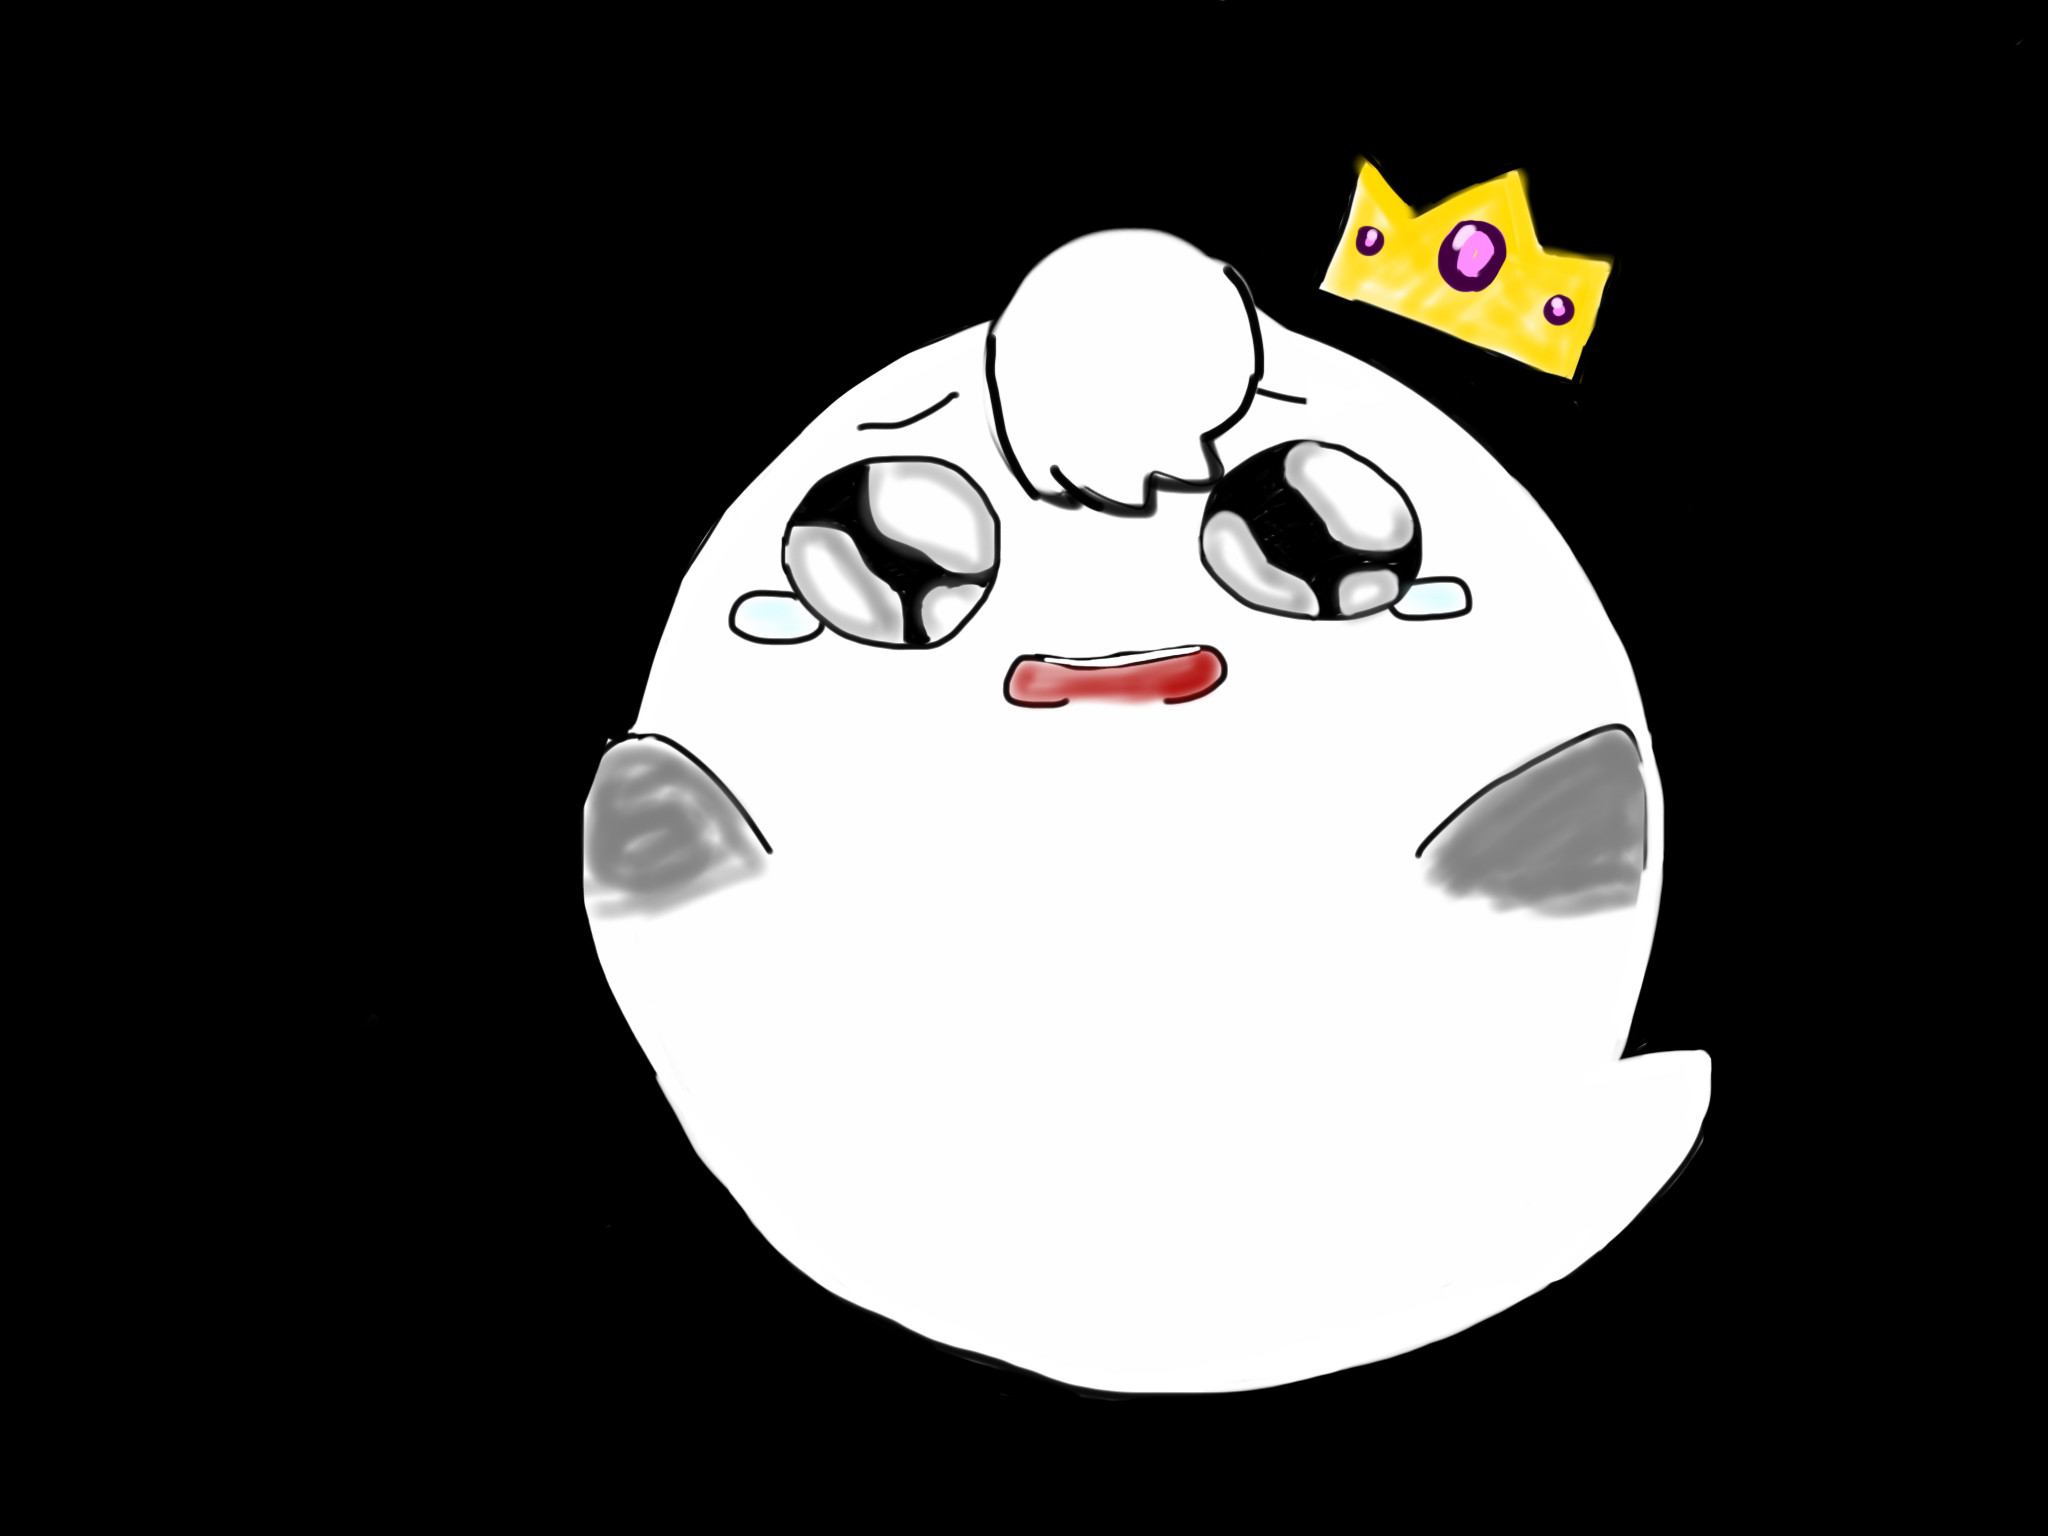 2048x1536 ... Free baby King boo by annie7764